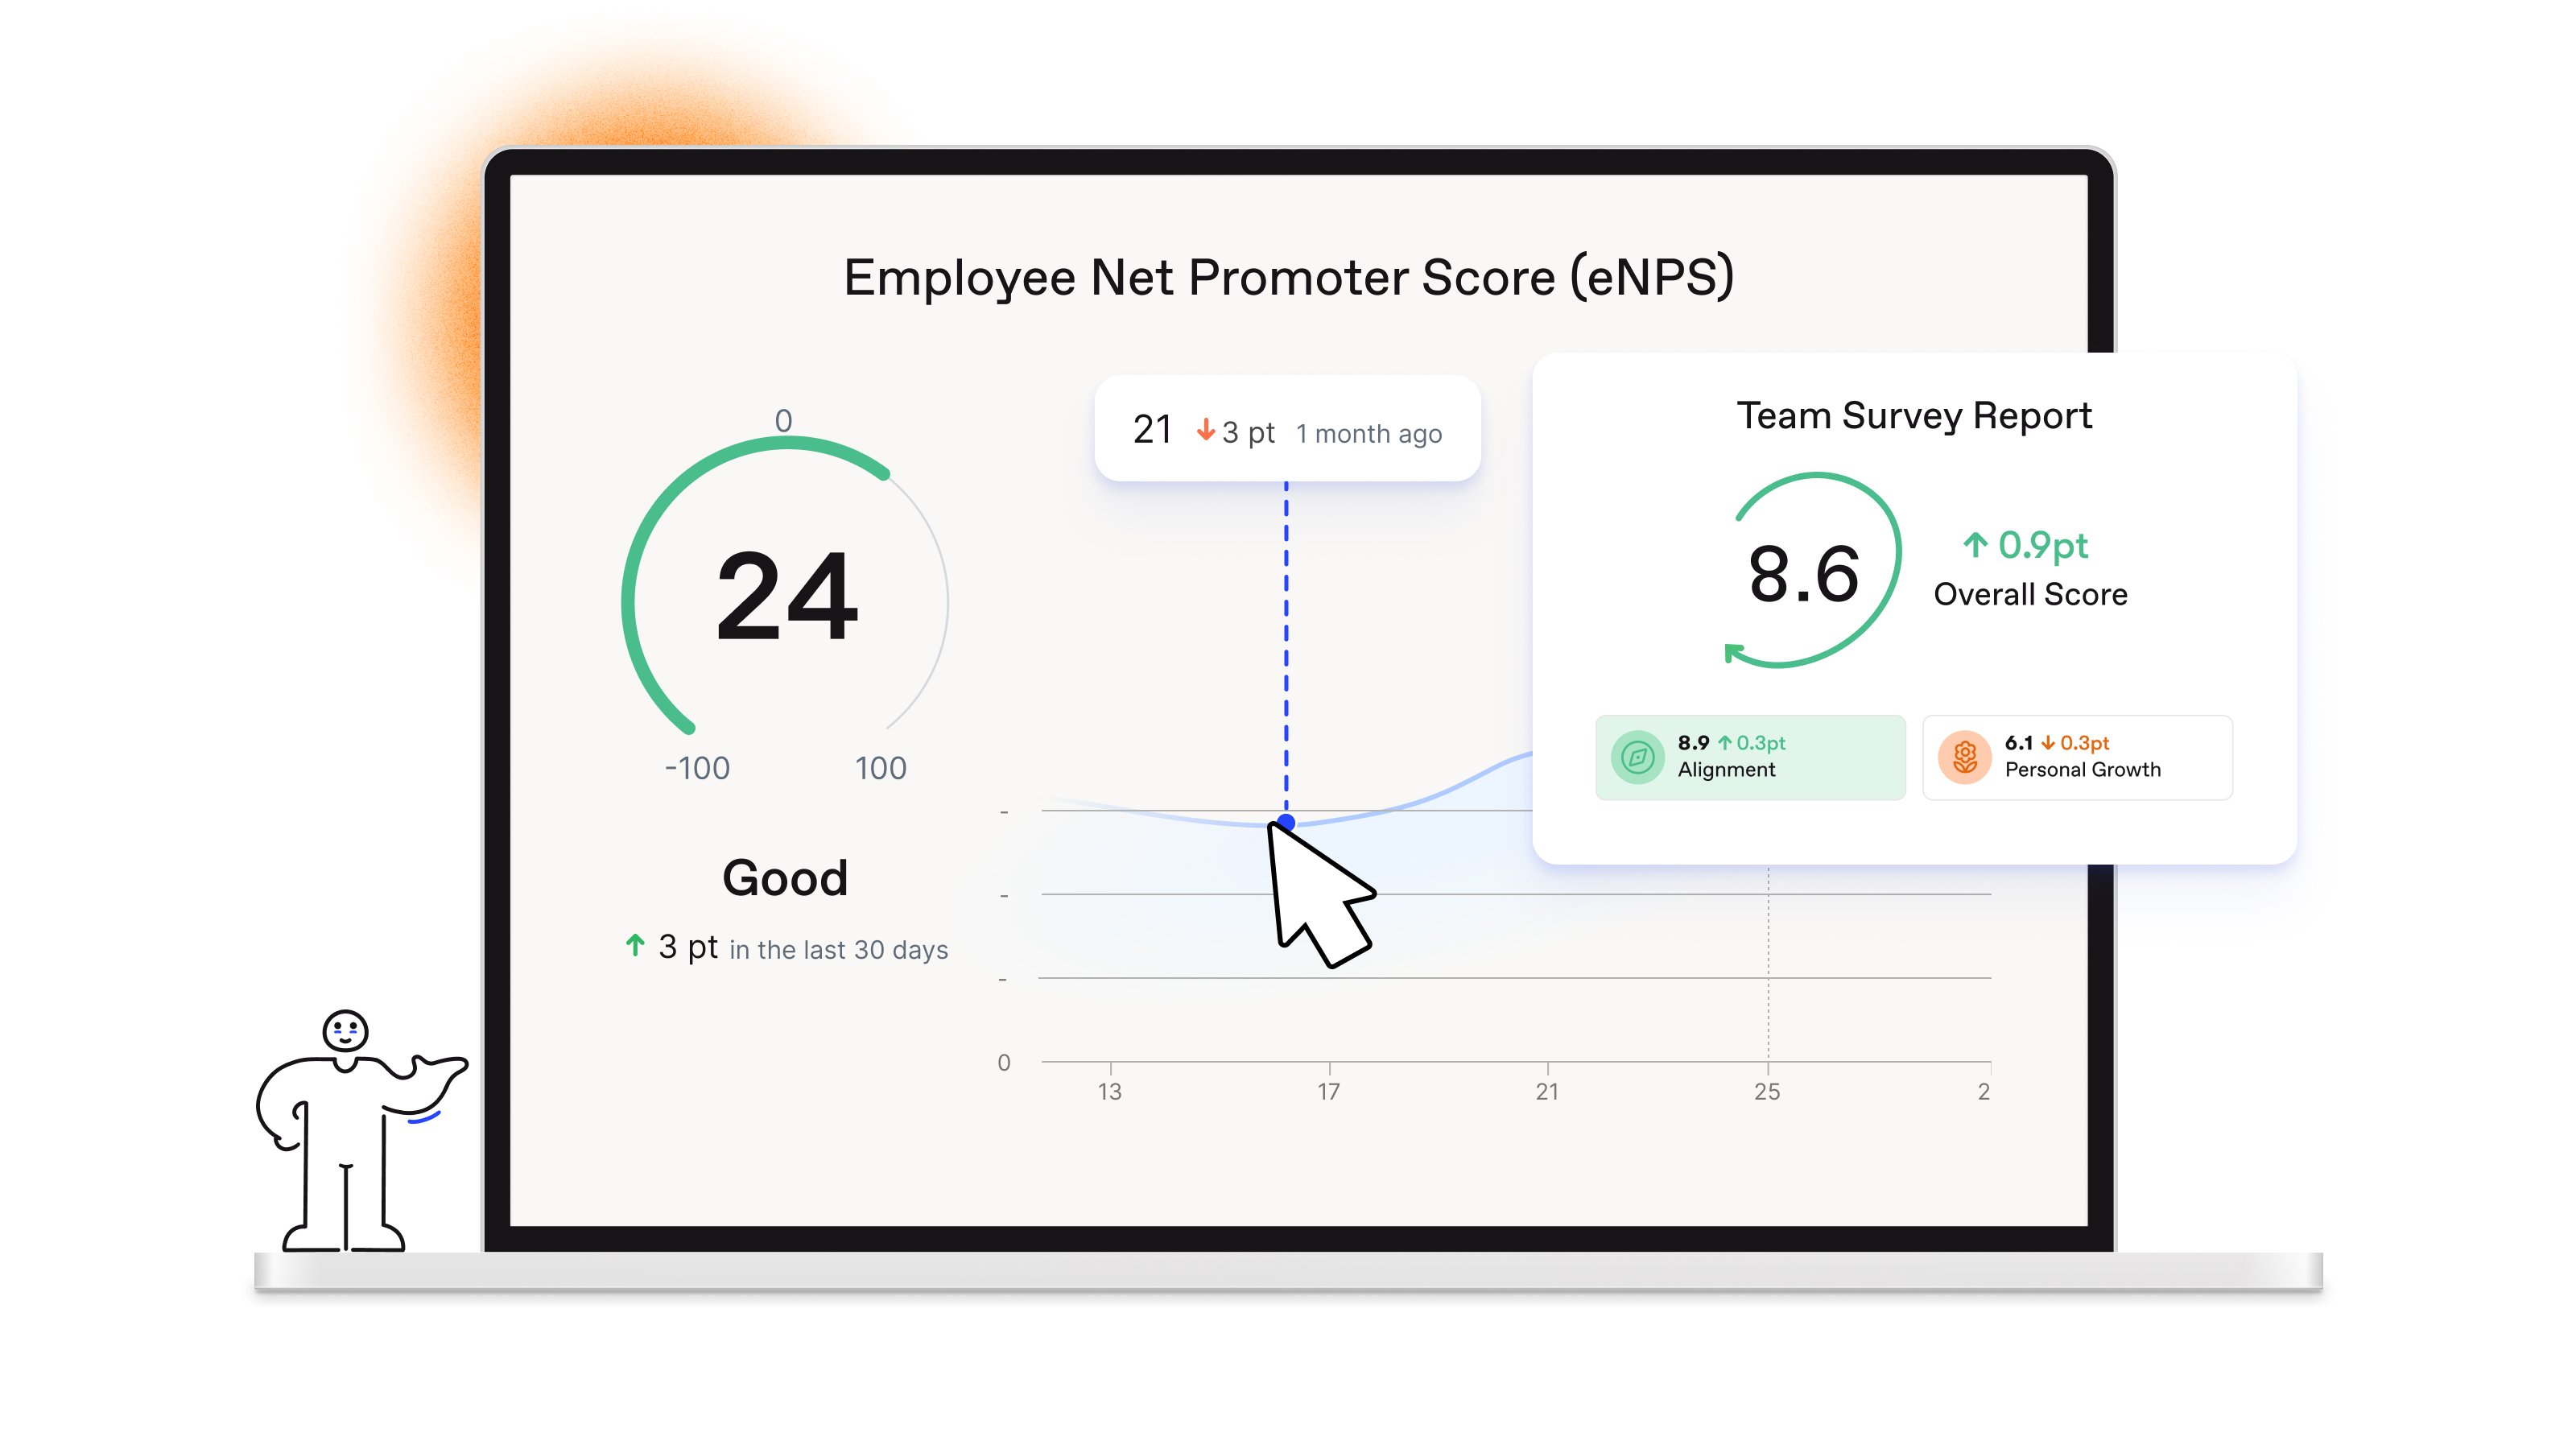 Officevibe graph tracking Employee Net Promoter Score and a Team Survey Report indicating an improvement in alignment and a drop in growth.